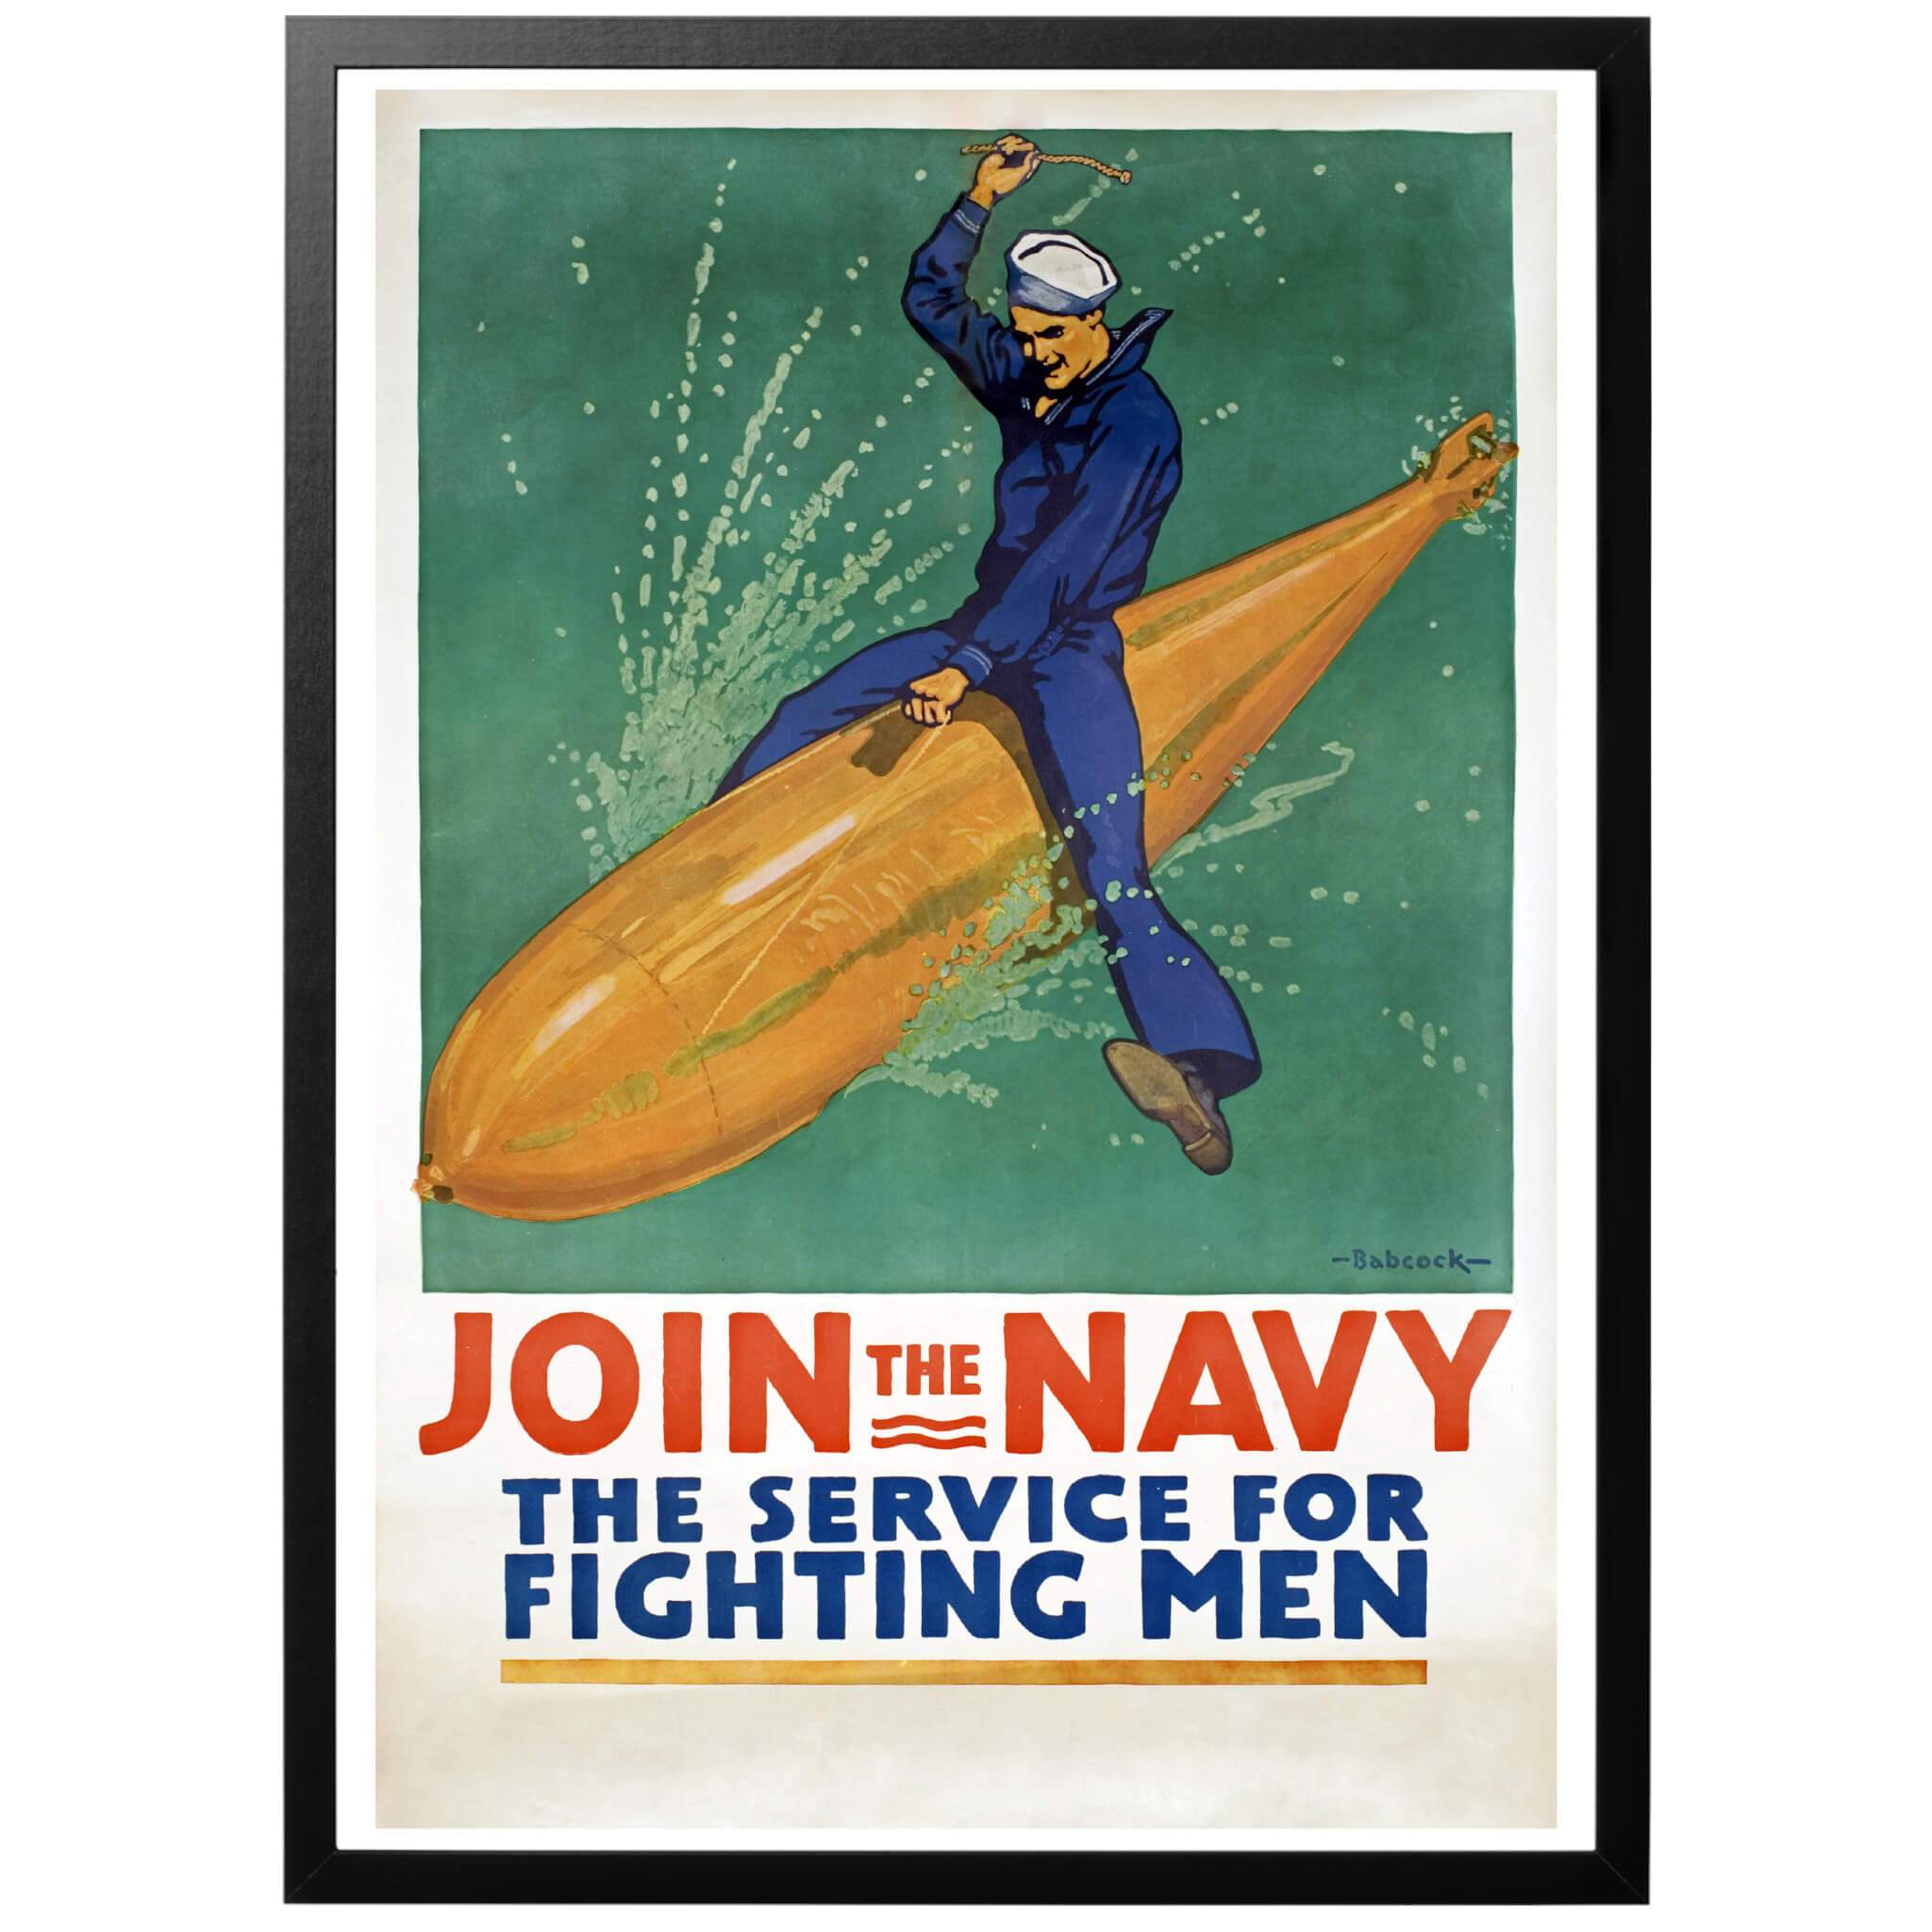 join-the-navy-the-service-for-fighting-men-poster_eef52135-5868-4177-b3f5-e241599713eb_2048x.jpg